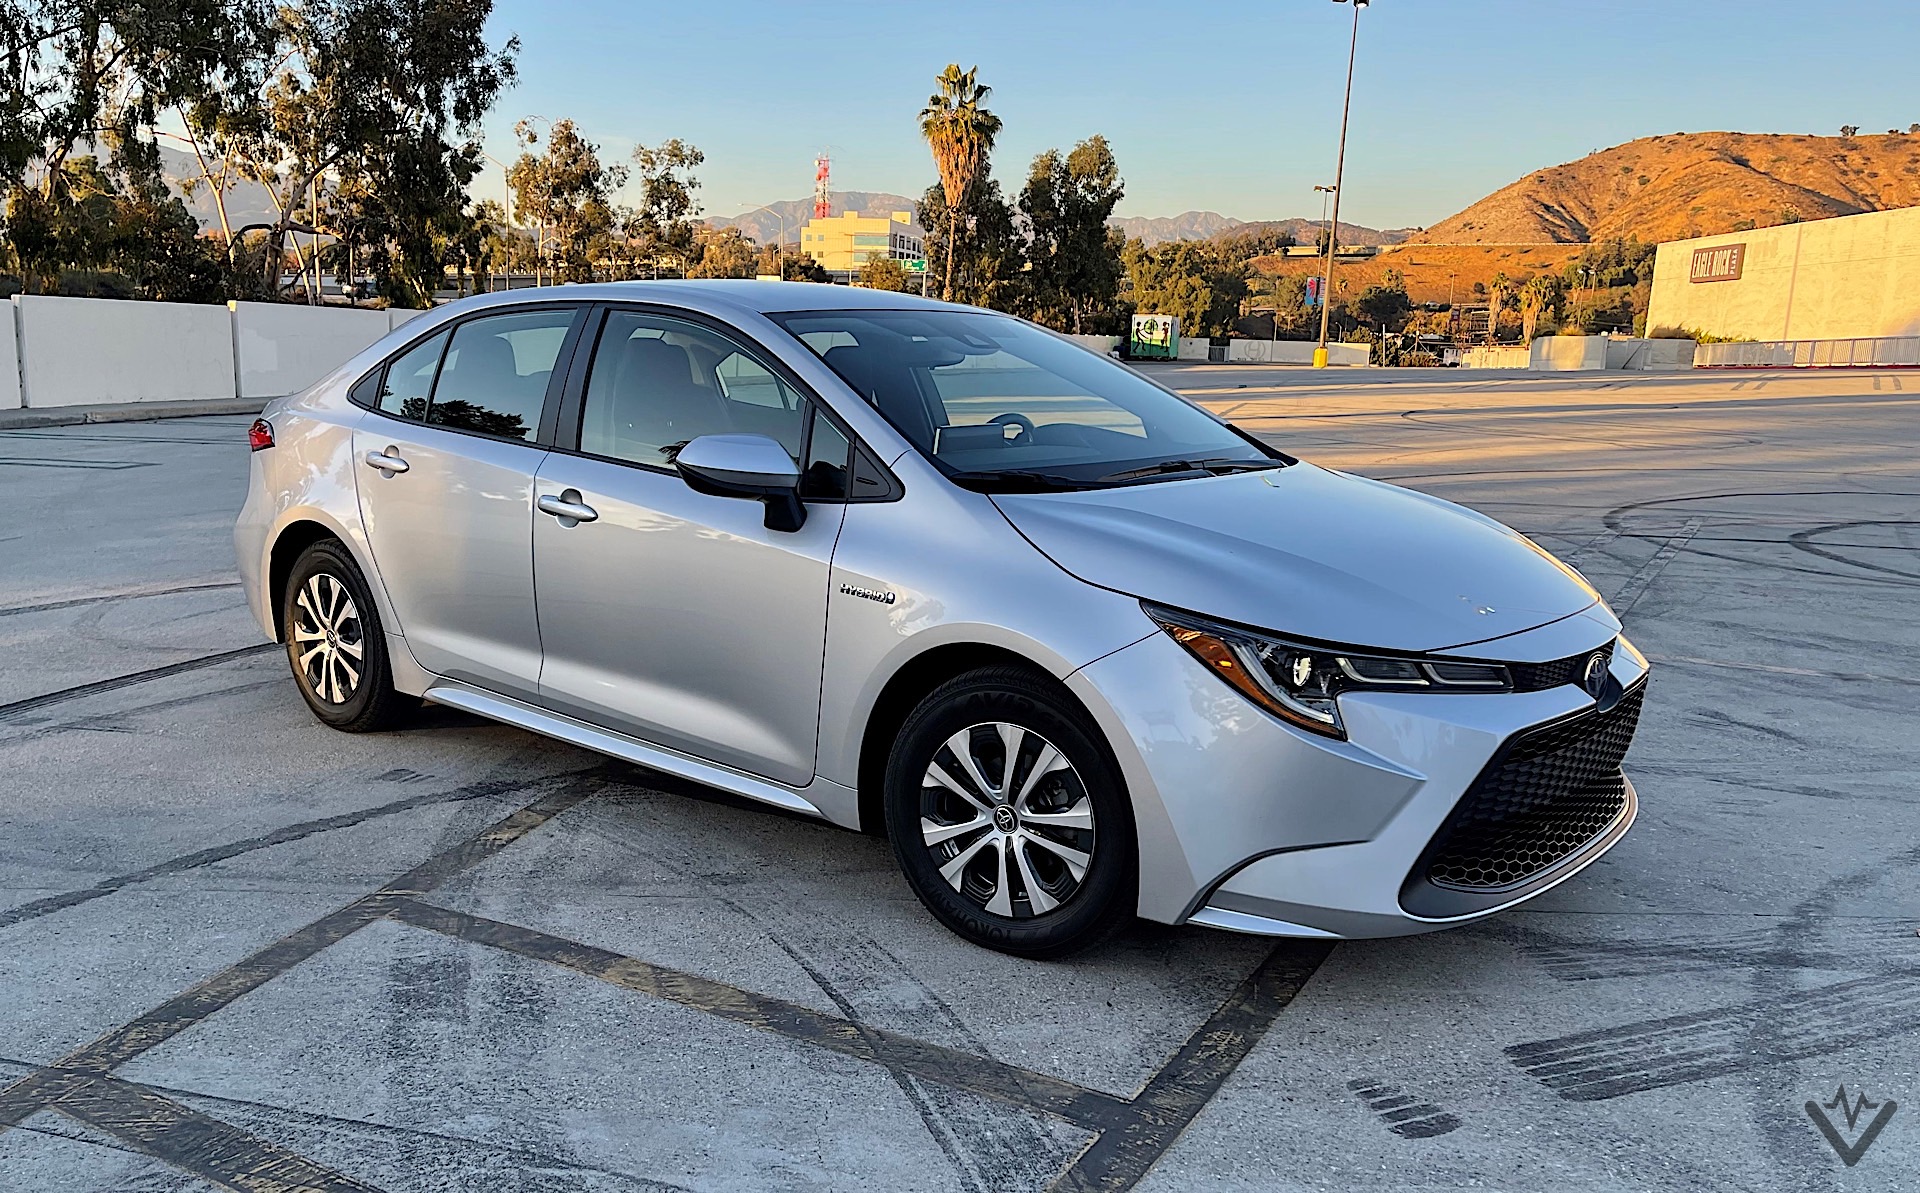 2021 Toyota Corolla Hybrid review: The ultimate miserly commuter - EV Pulse